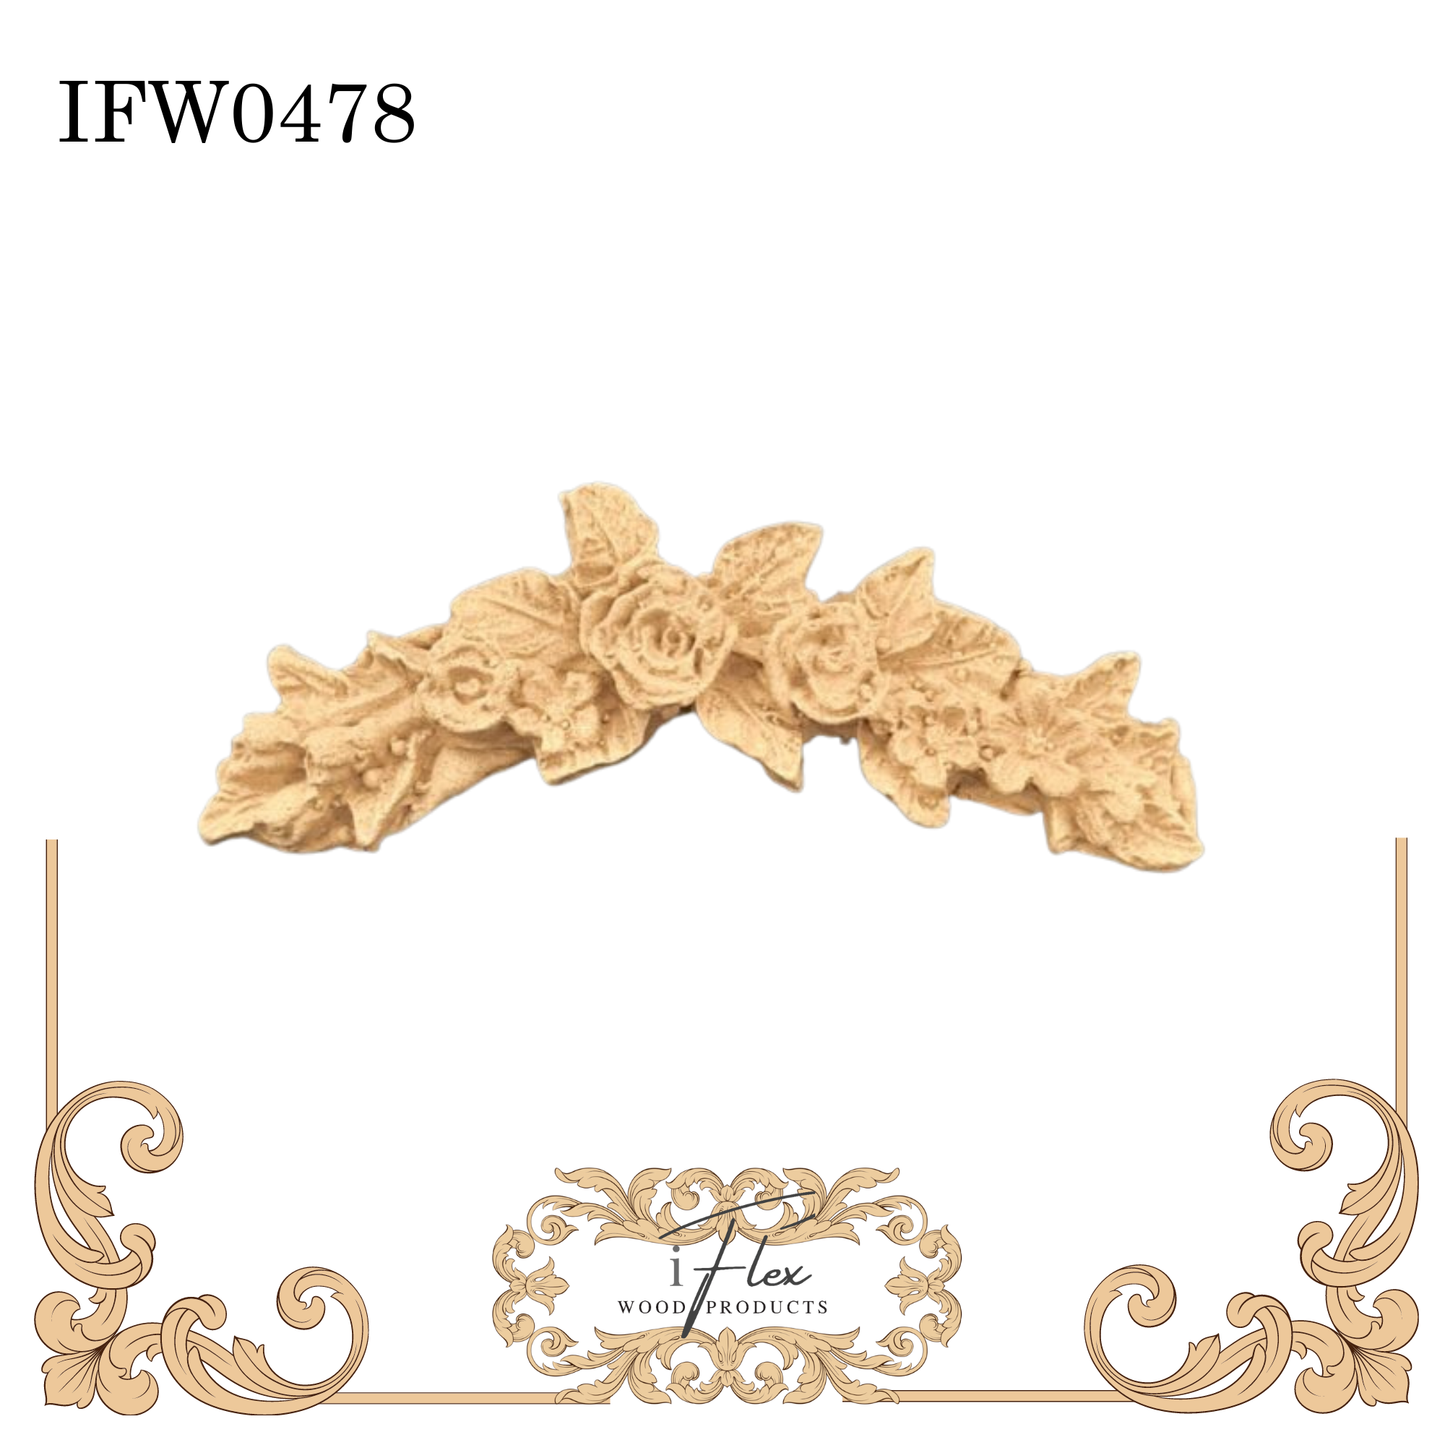 IFW 0478  iFlex Wood Products flower garland bendable mouldings, flexible, wooden appliques